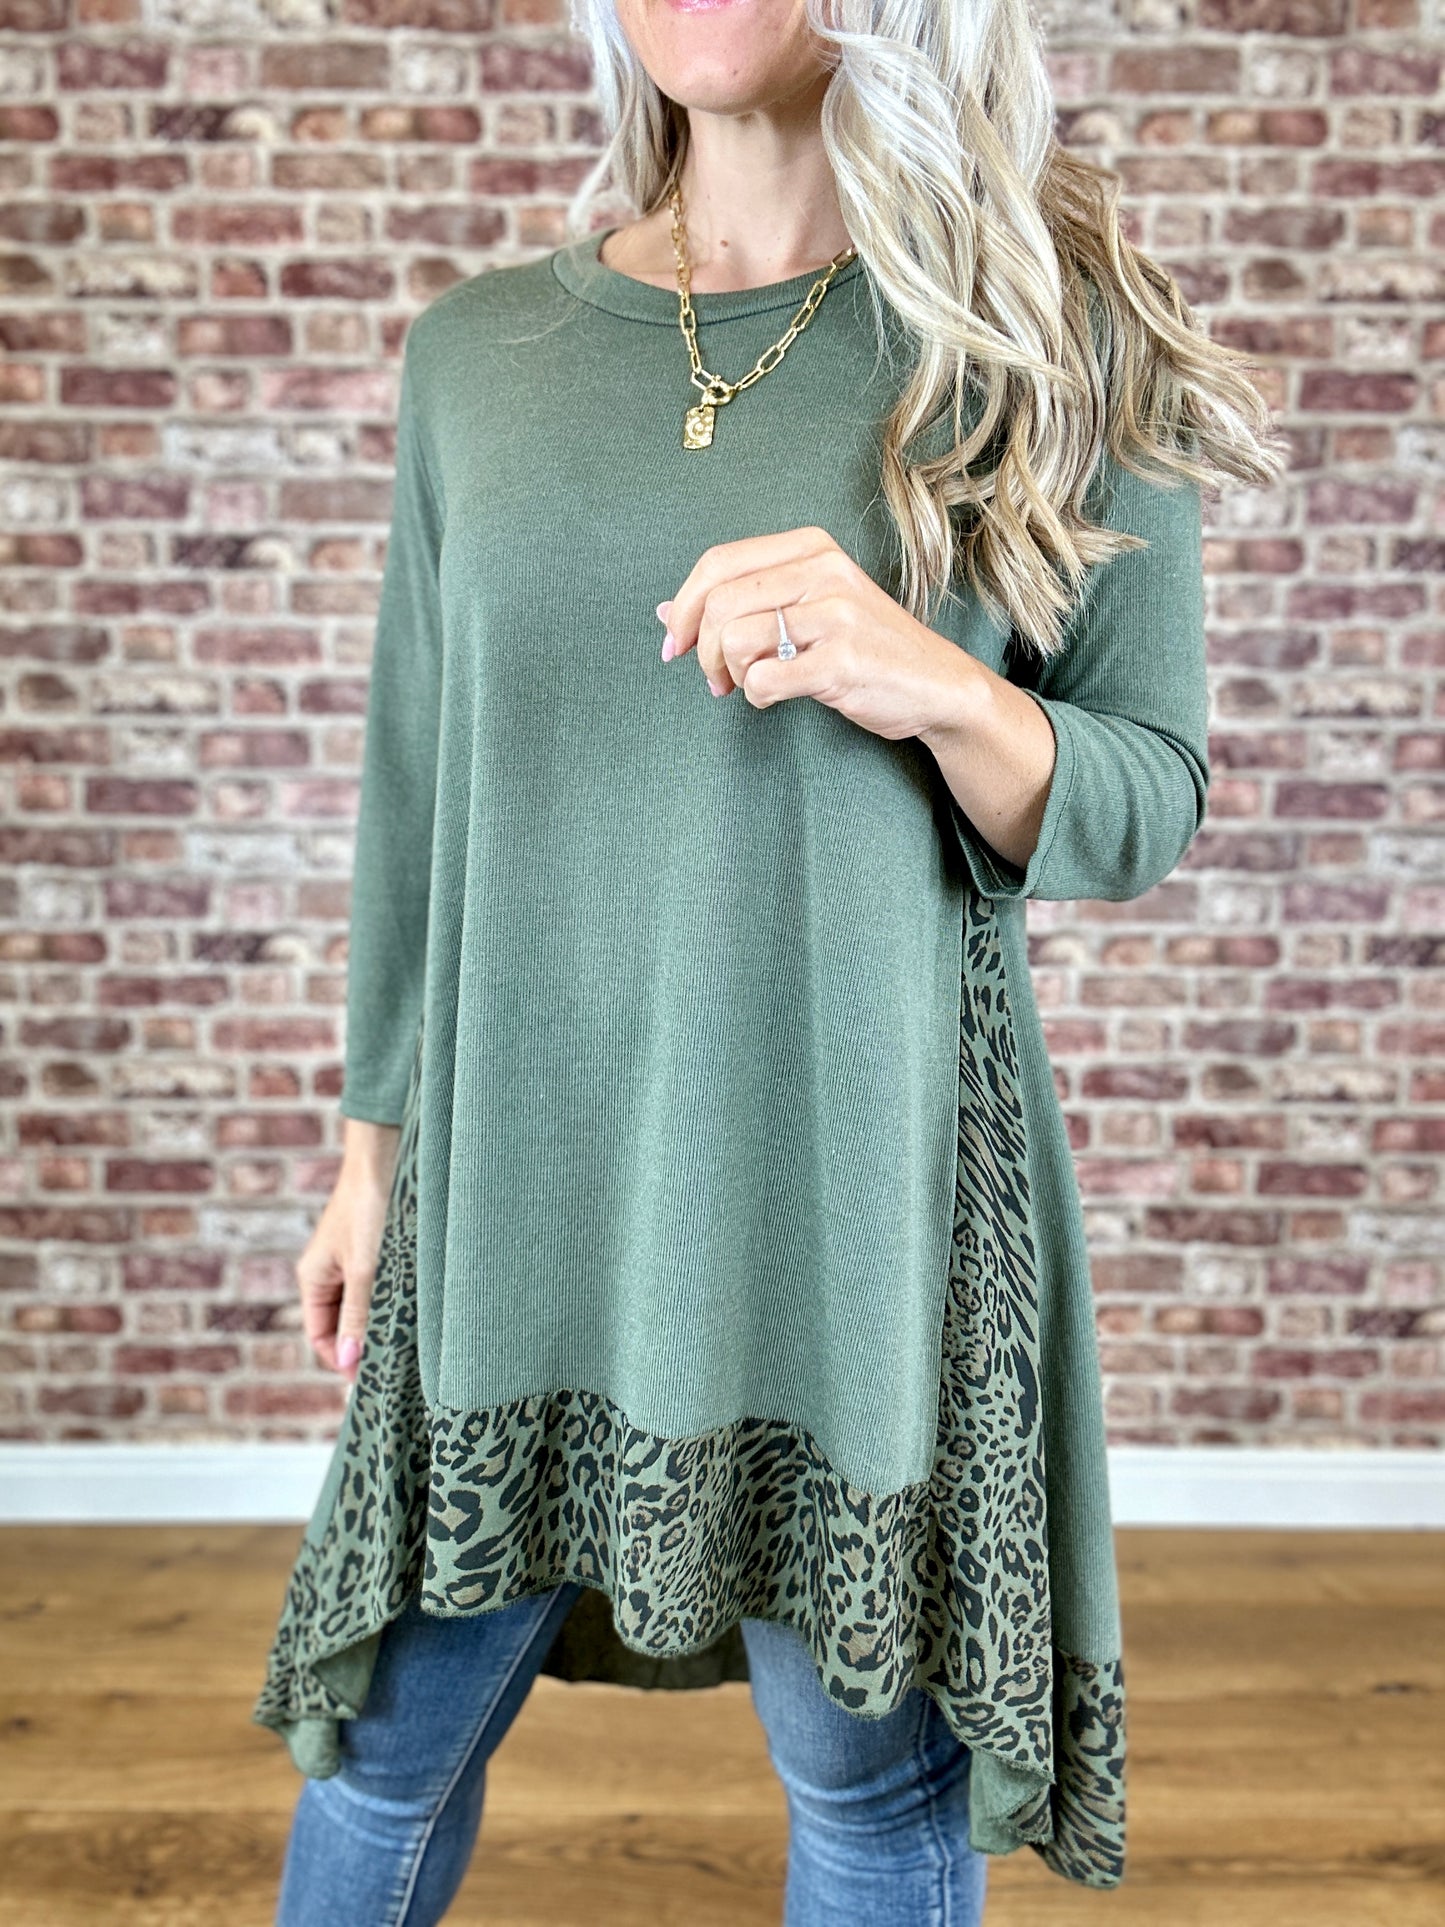 Leopard Flare Top